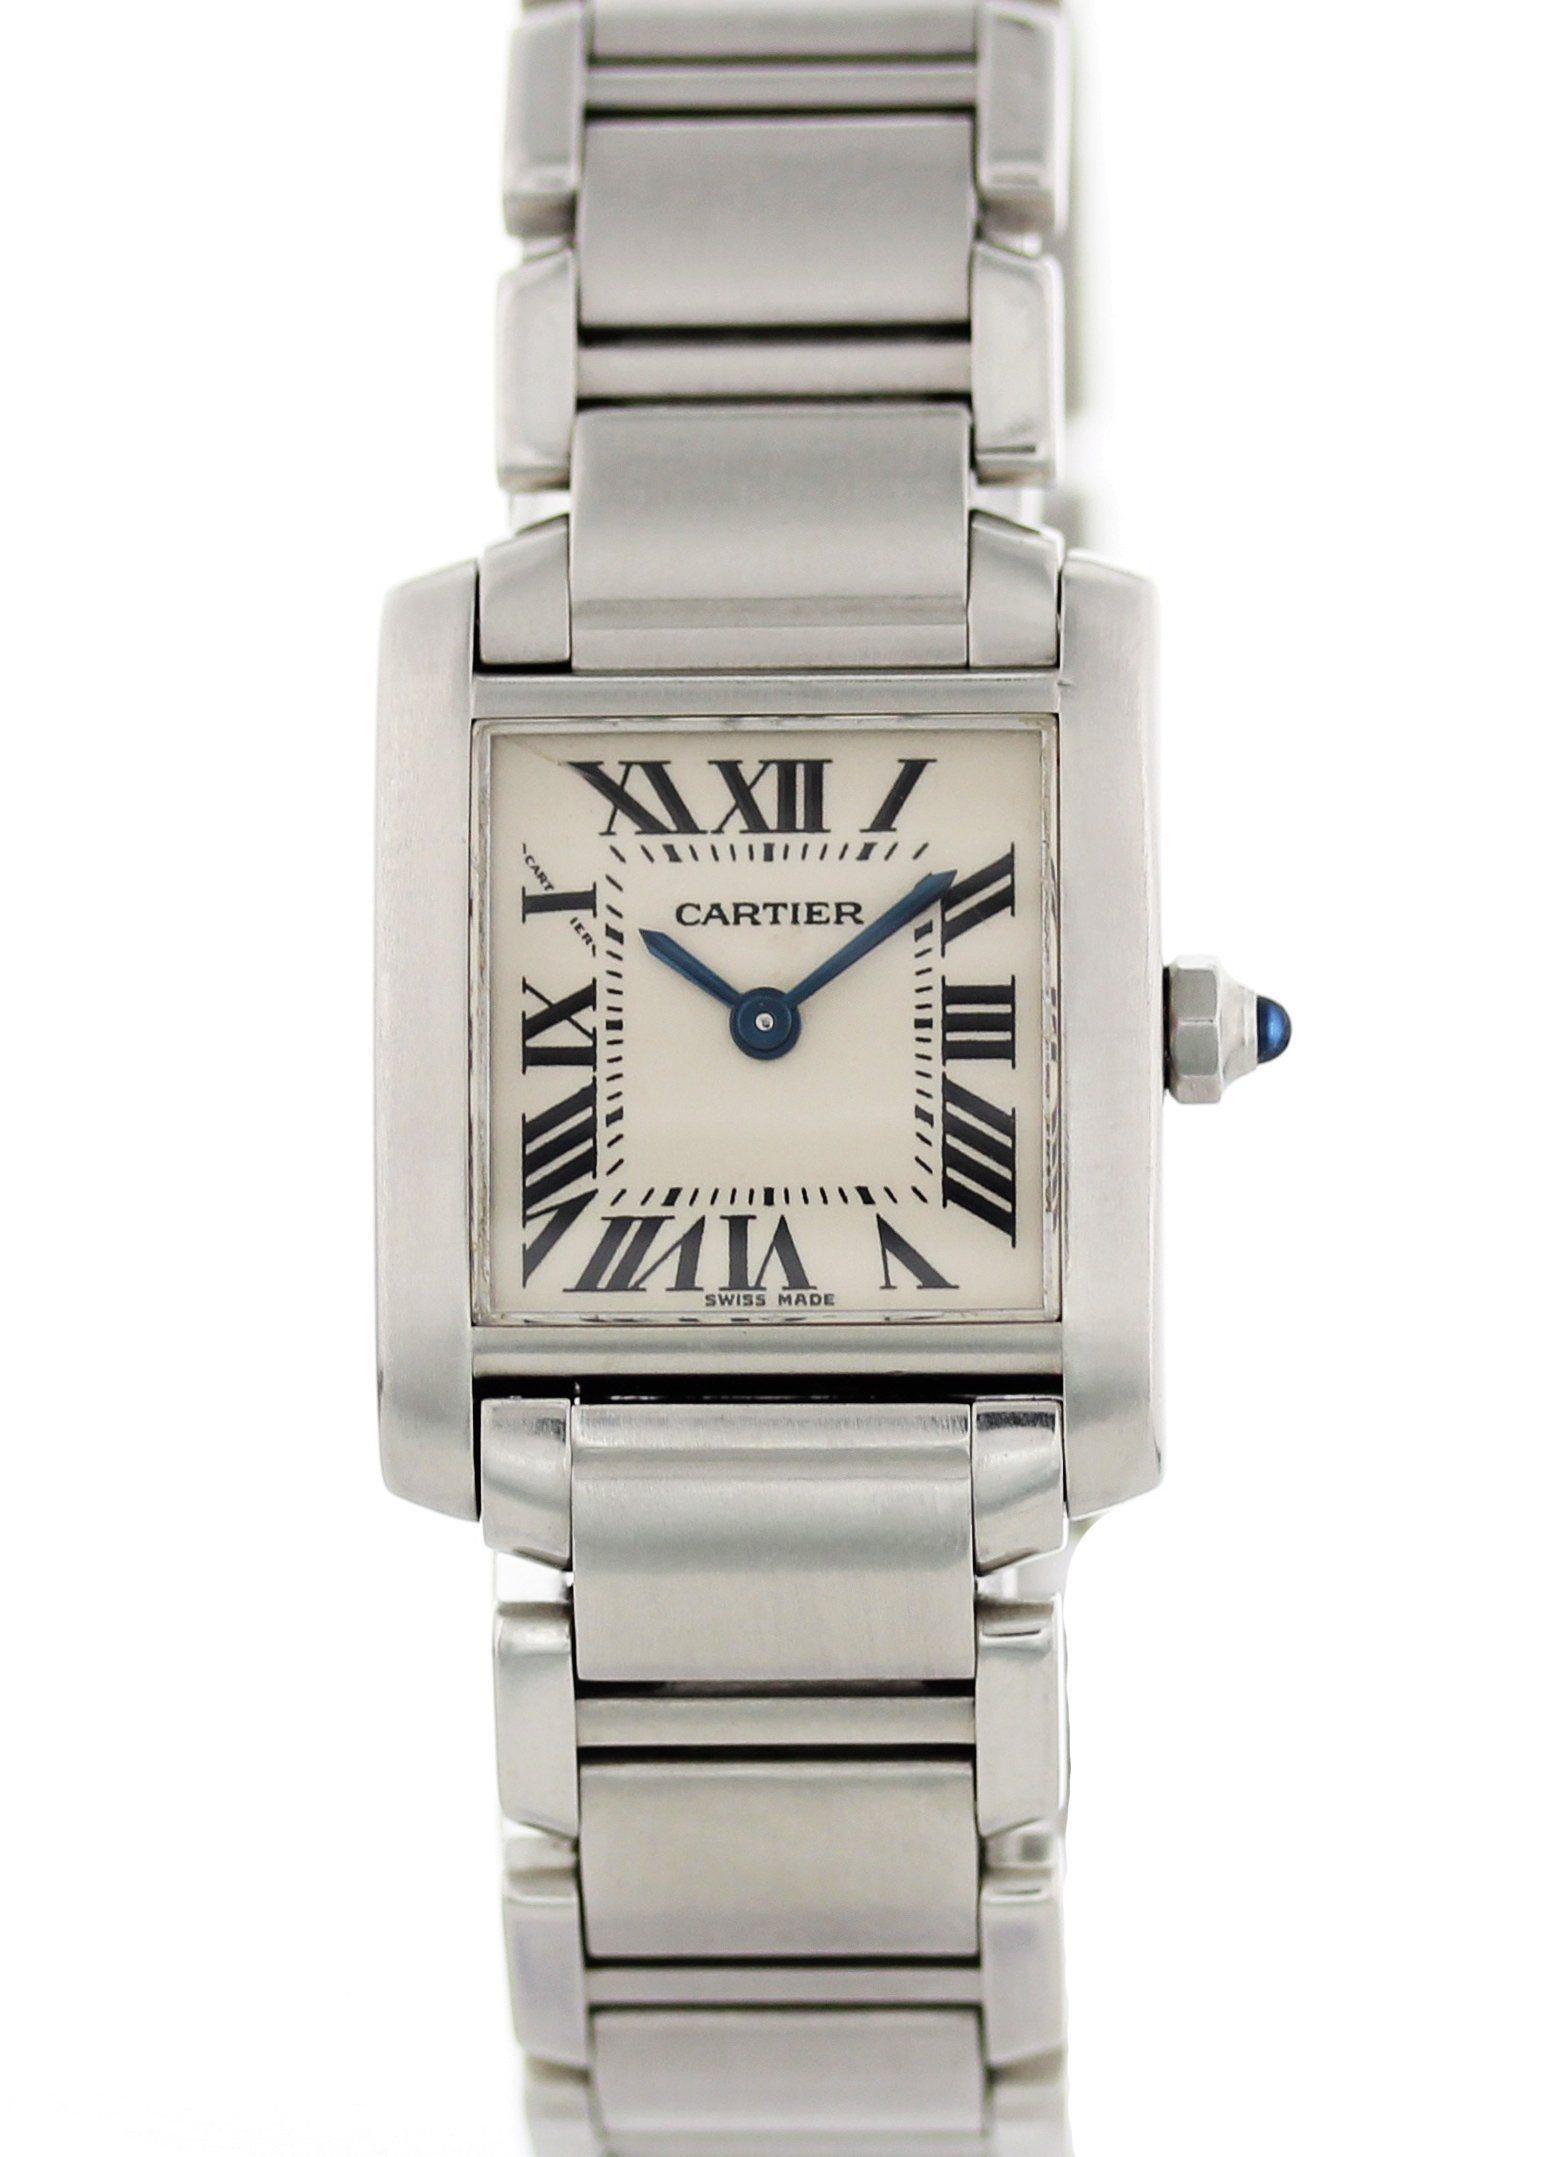 Cartier Tank Francaise 2384 Ladies Watch.
20mm x 25mmmm Stainless Steel case. 
Stainless Steel Stationary bezel. 
Off-White dial with Blue steel hands and Roman numeral hour markers. 
Minute markers on the outer dial. 
Stainless Steel Bracelet with